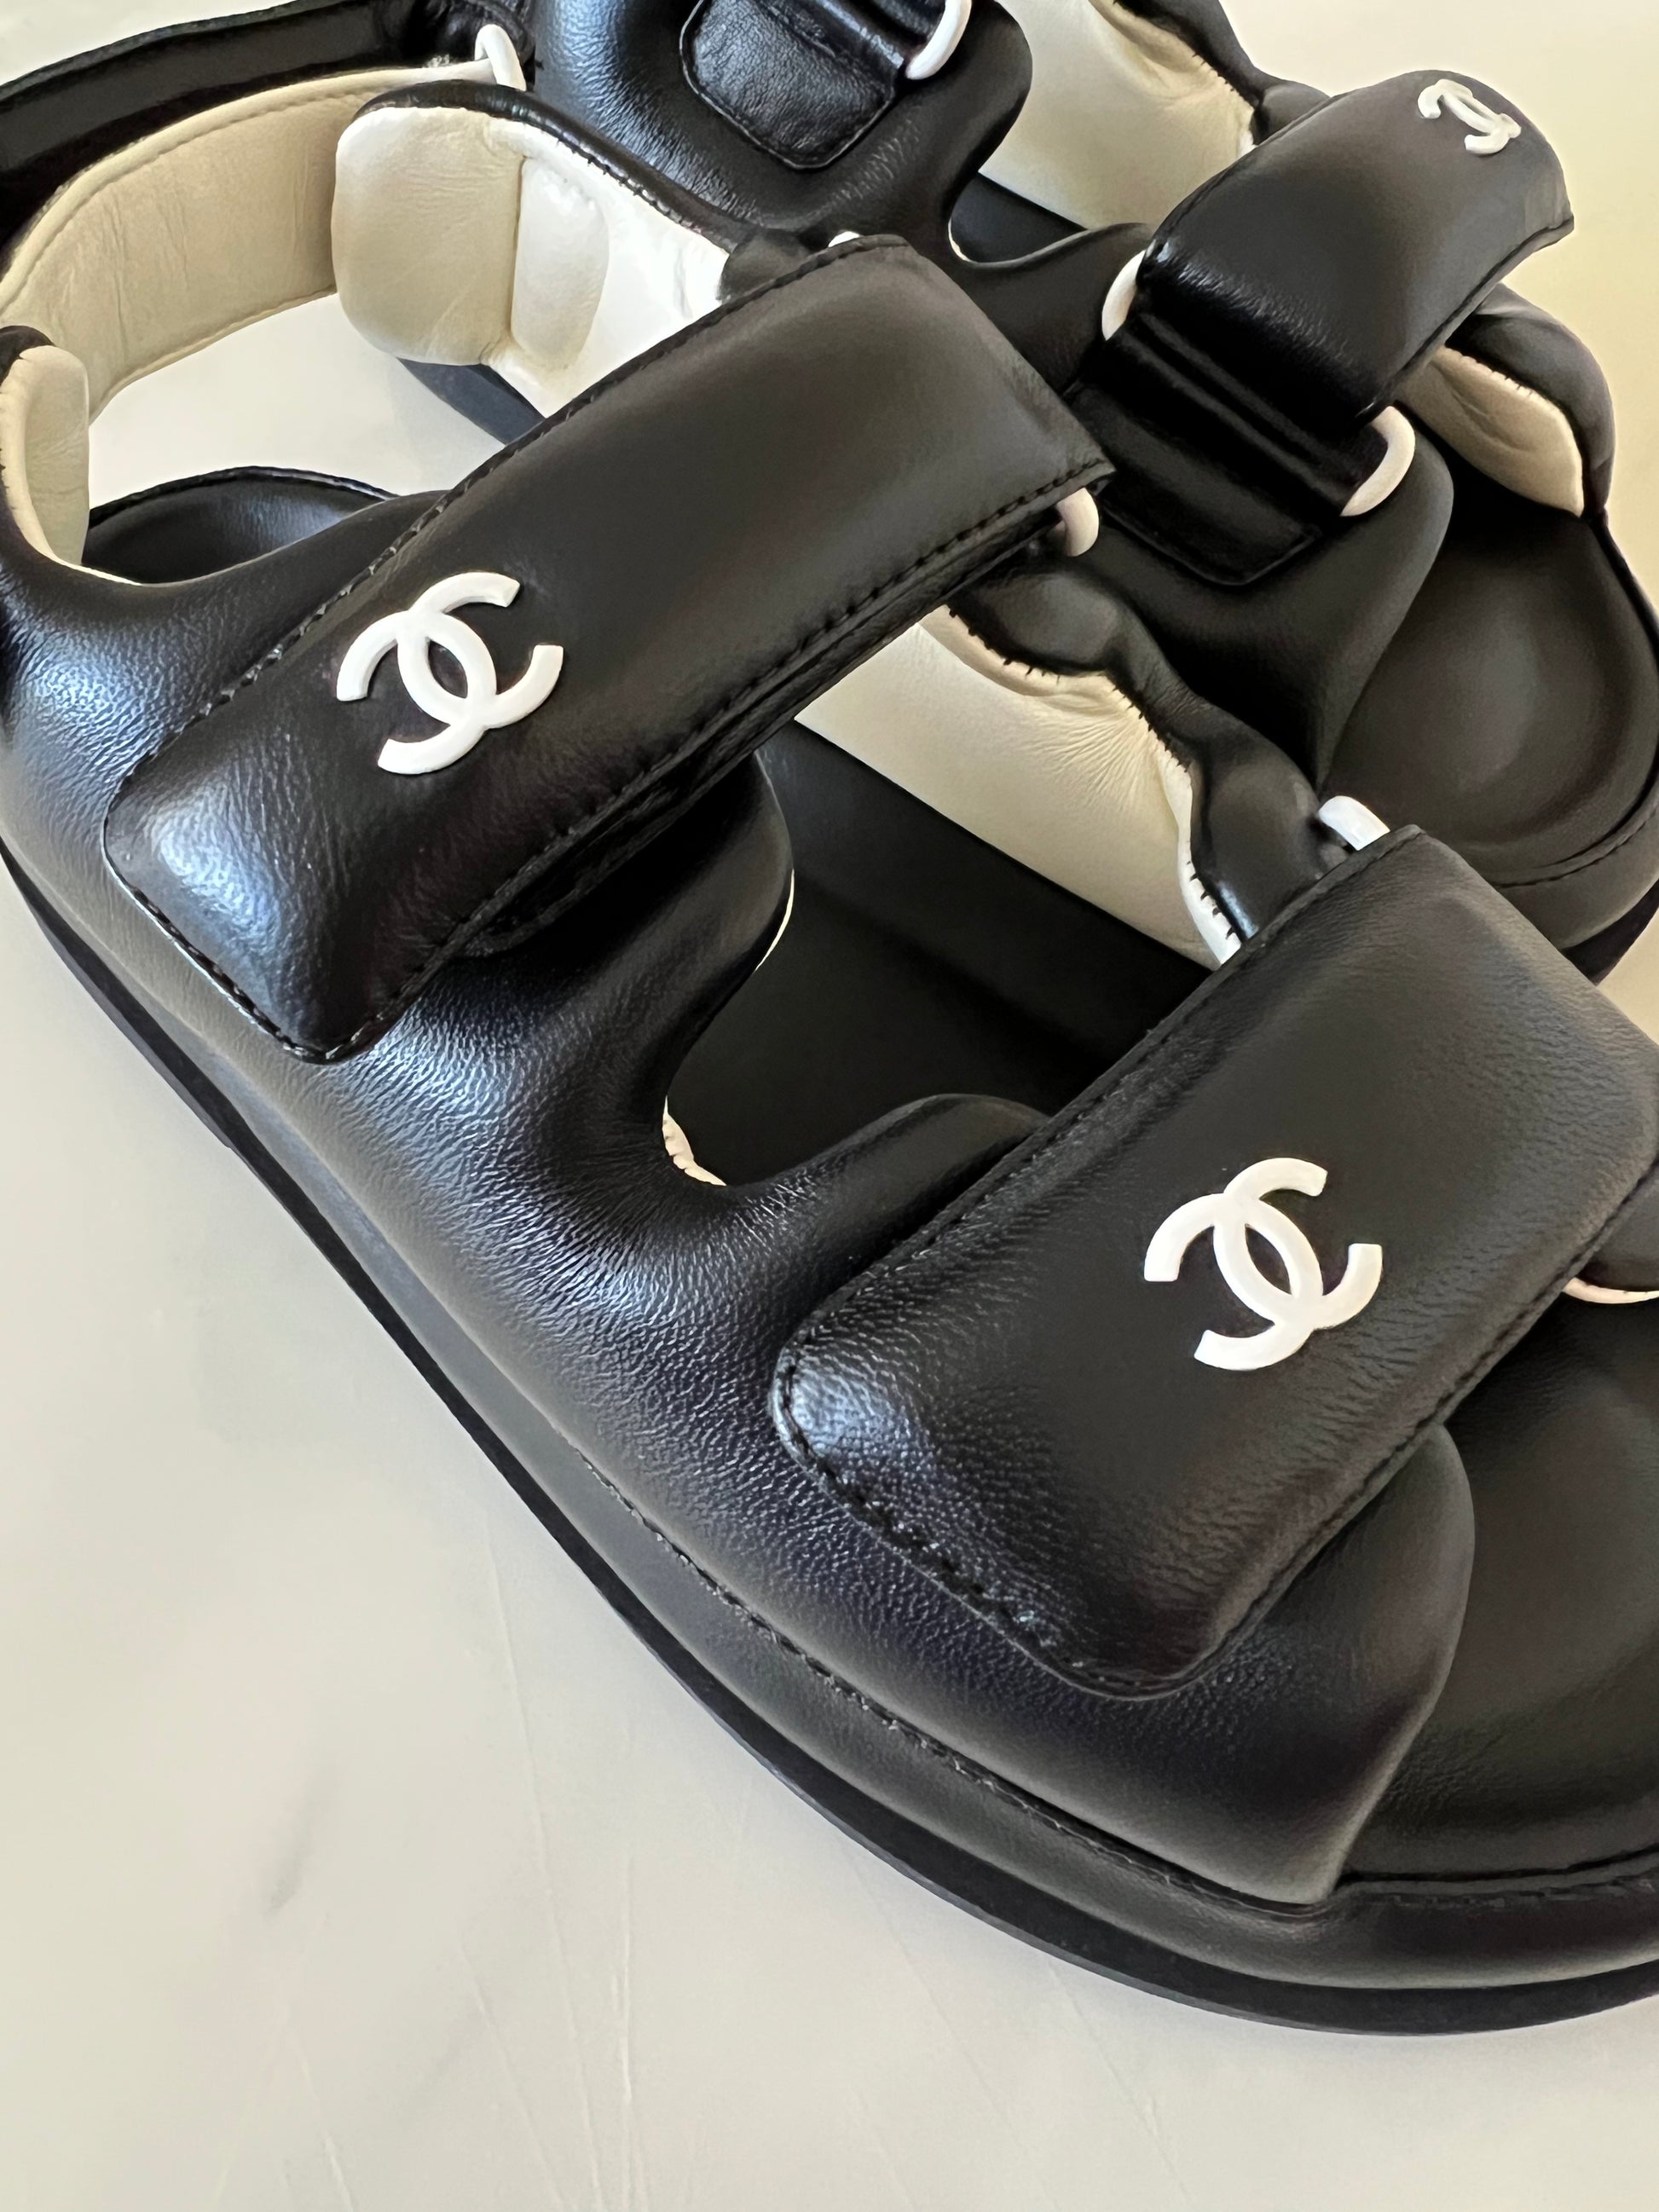 Chanel Leather CC 'Dad' Sandals (Black/Gold) Chanel : Shop Now to Get the  Latest Fashions